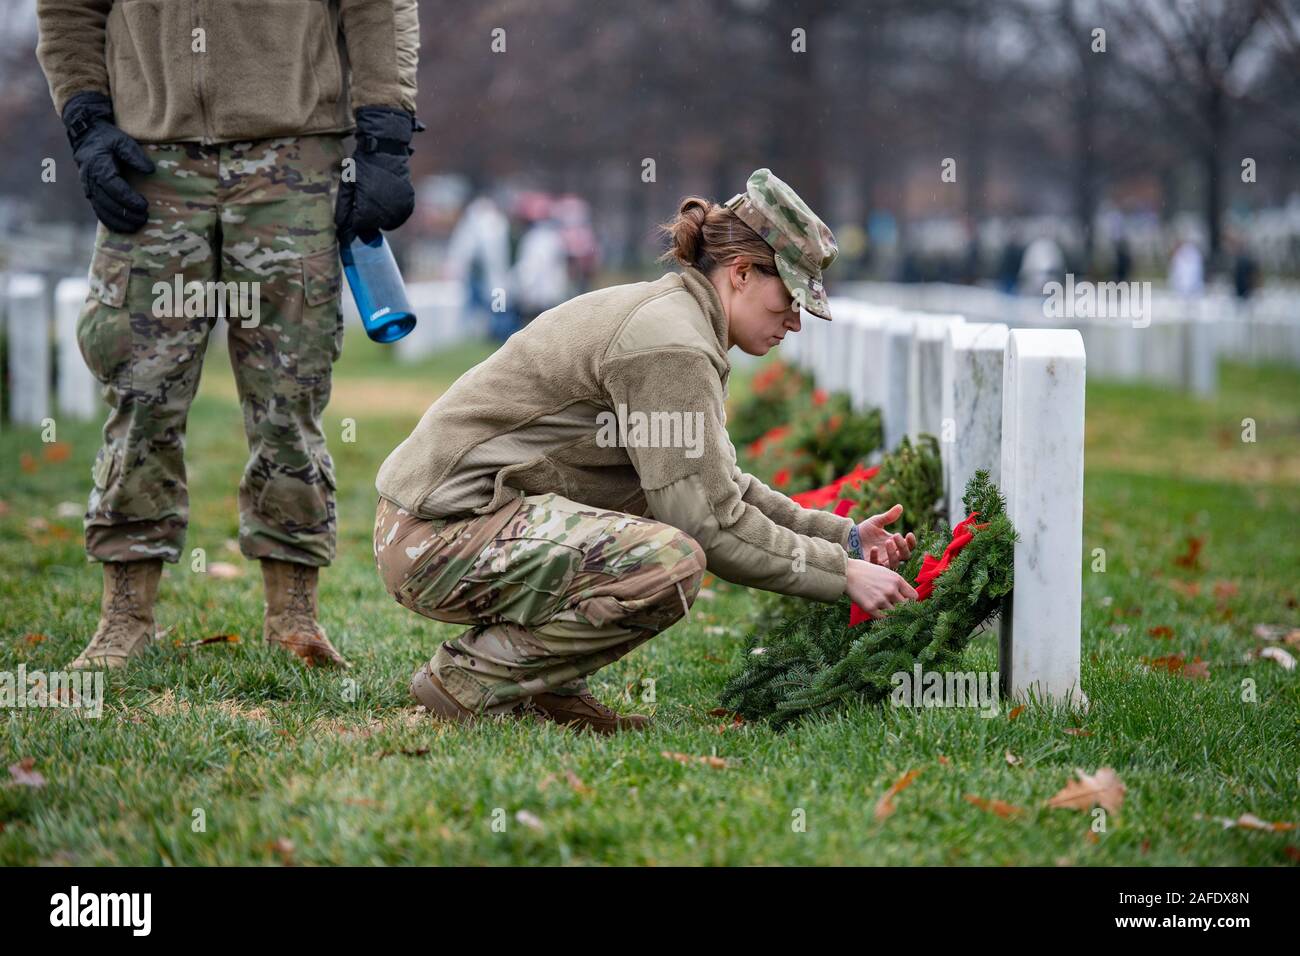 Arlington, United States of America. 14 December, 2019. A U.S. soldier places a wreath on the gravesite of a fallen service member during the 28th Wreaths Across America Day at Arlington National Cemetery December 14, 2019 in Arlington, Virginia. More than 38,000 volunteers place wreaths at every gravesite at Arlington National Cemetery and other sites around the nation.  Credit: Elizabeth Fraser/DOD/Alamy Live News Stock Photo